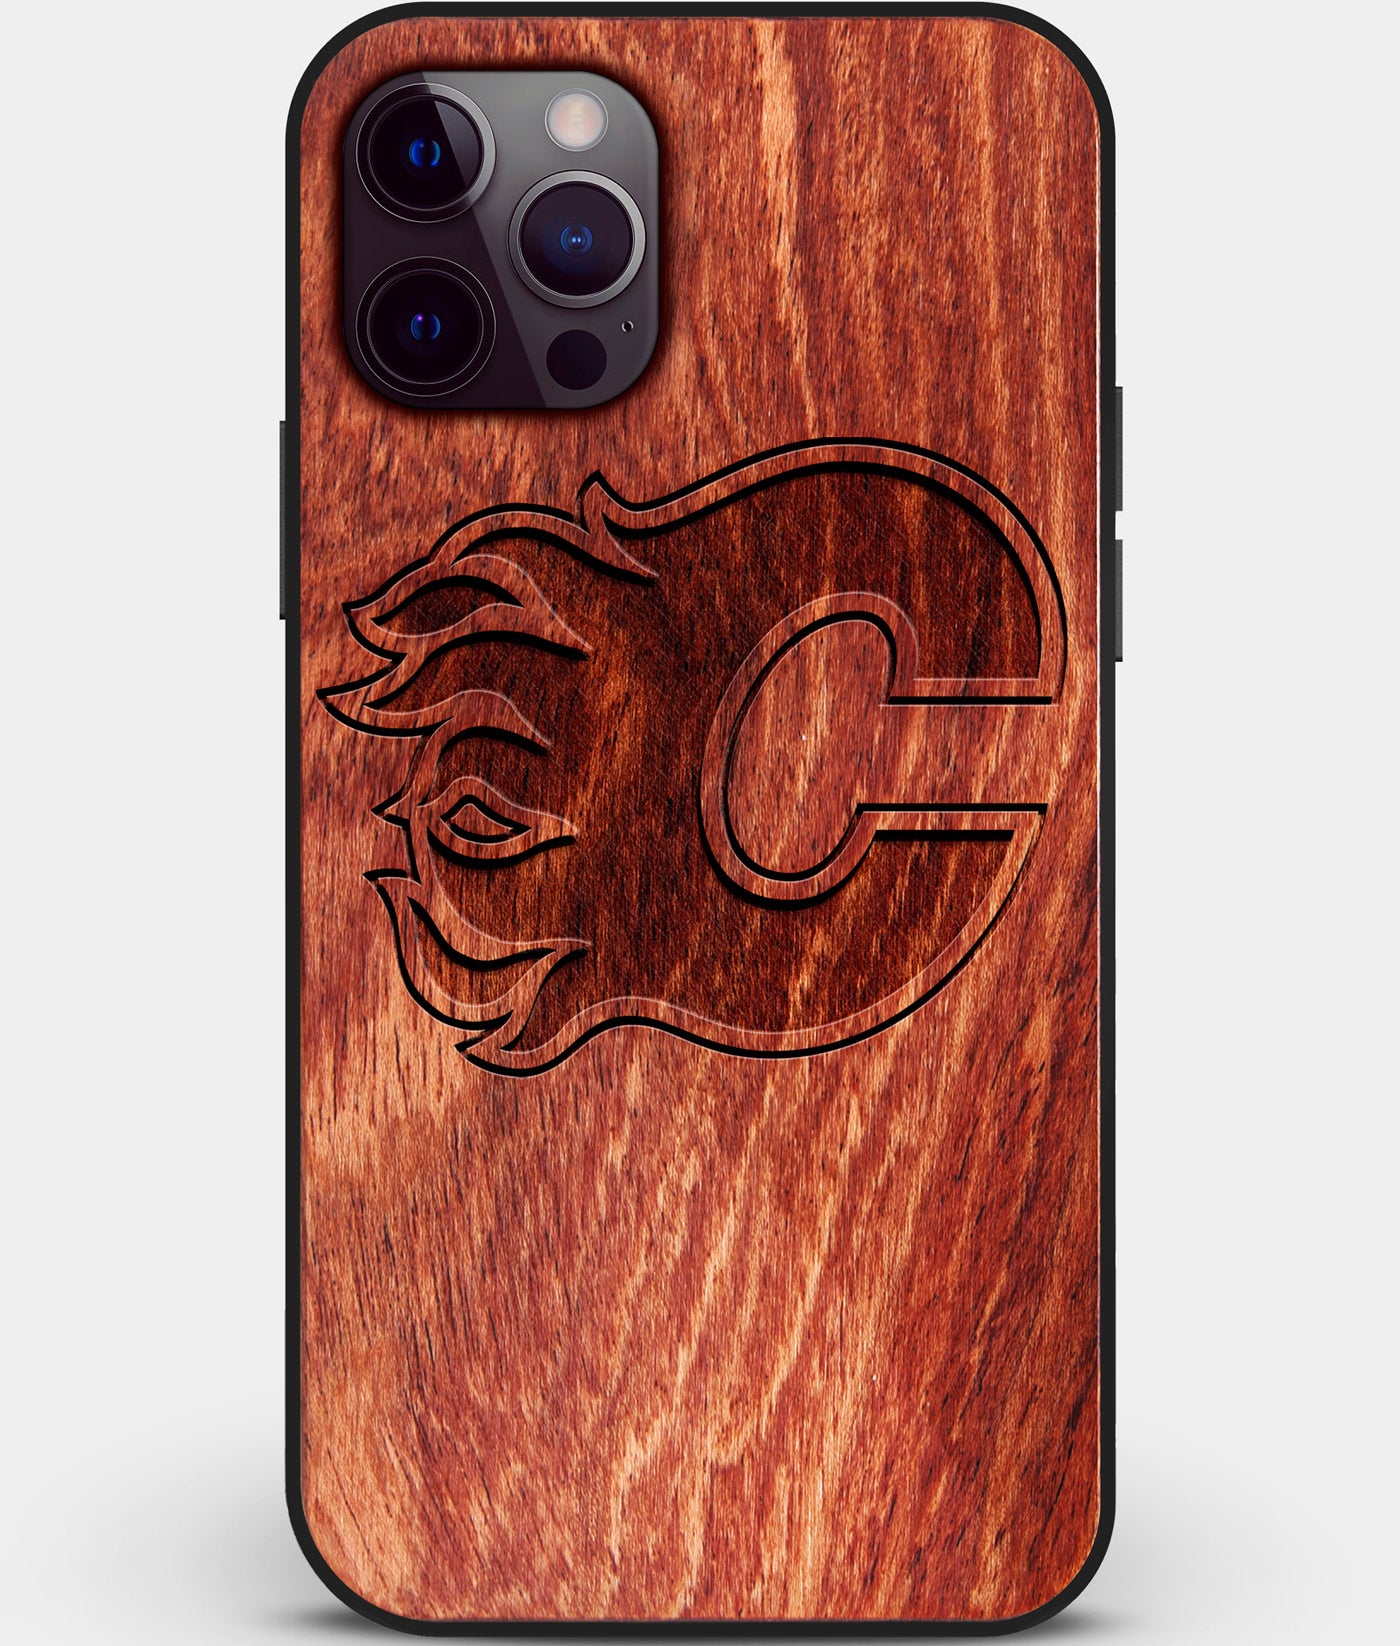 Custom Carved Wood Calgary Flames iPhone 12 Pro Max Case | Personalized Mahogany Wood Calgary Flames Cover, Birthday Gift, Gifts For Him, Monogrammed Gift For Fan | by Engraved In Nature